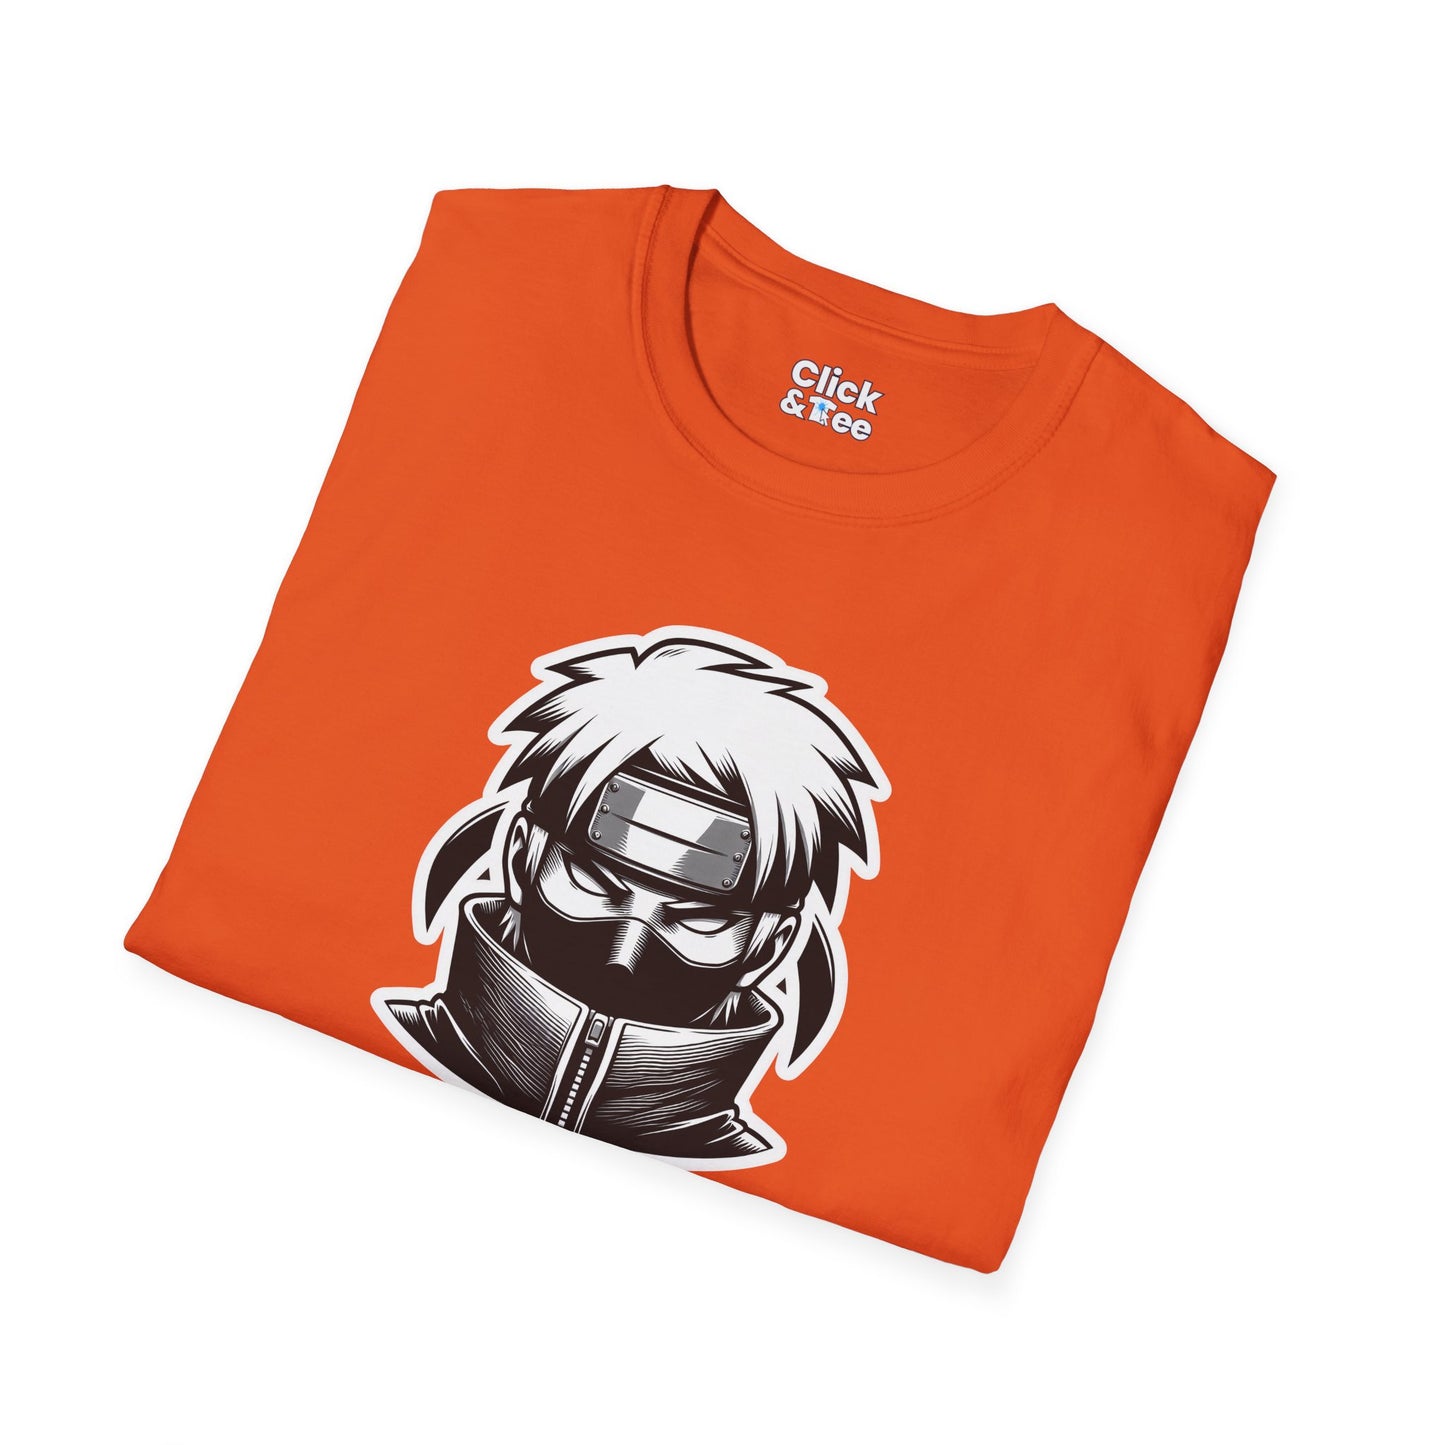 Unique T-Shirt - Invisible Ninja Ready to attack - Shonen Anime Style T-Shirt